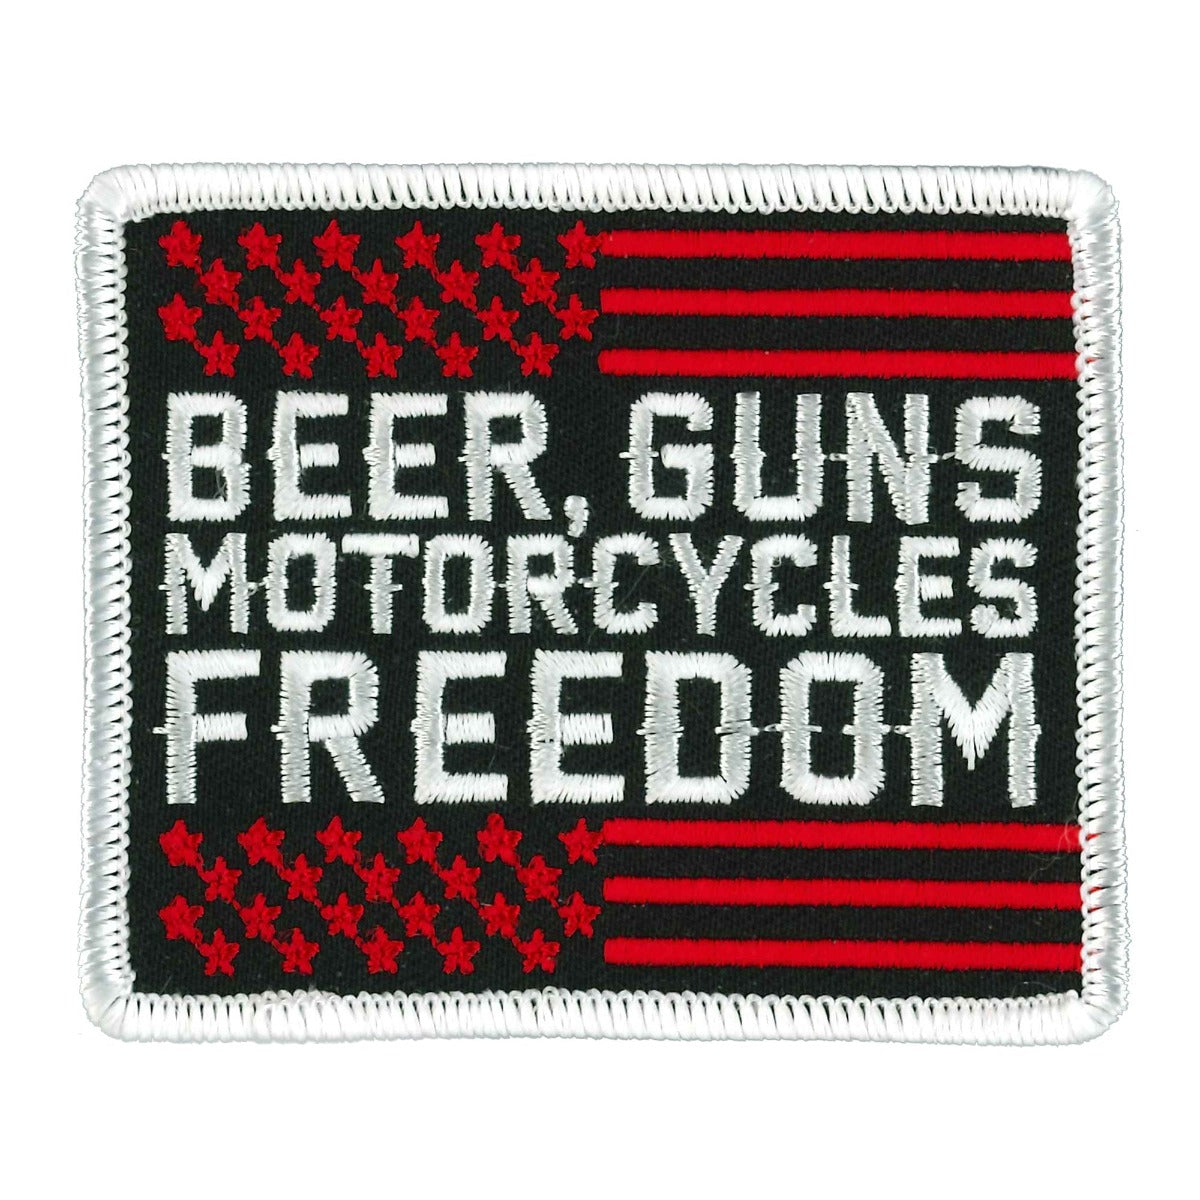 Hot Leathers 3" Beer Guns Motorcycles and Freedom Patch